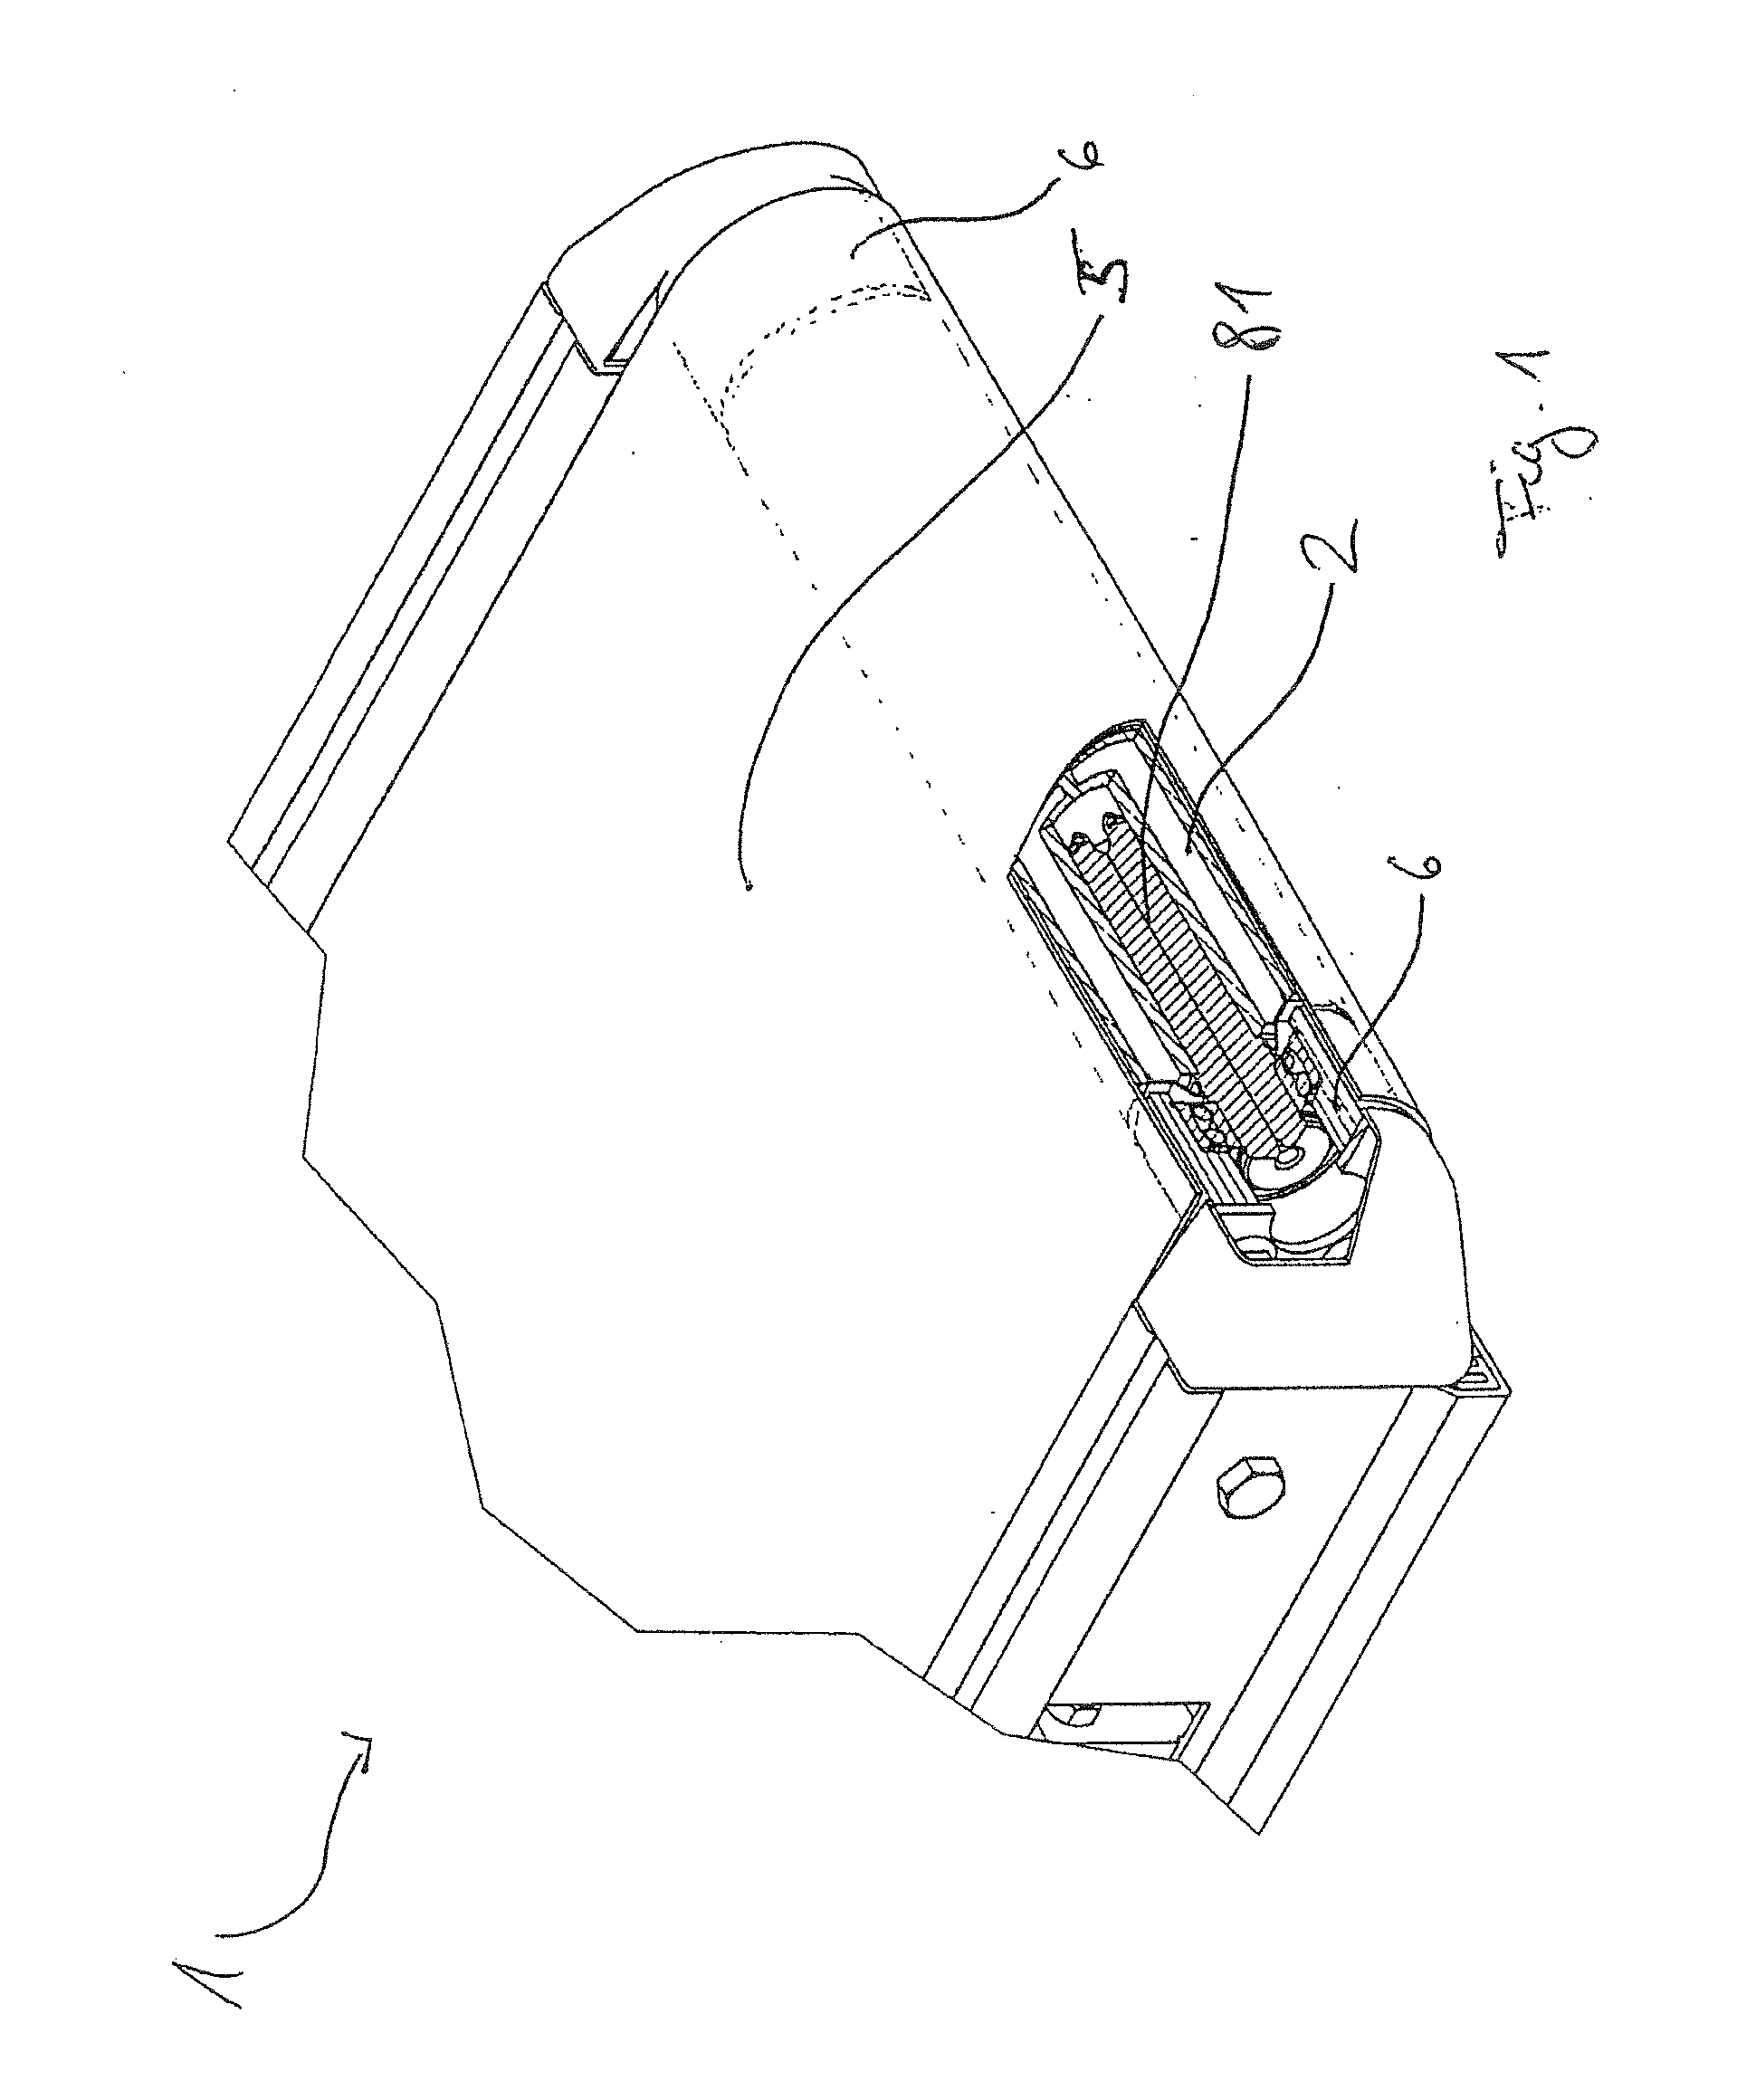 Shaft-hub assembly with expansion element